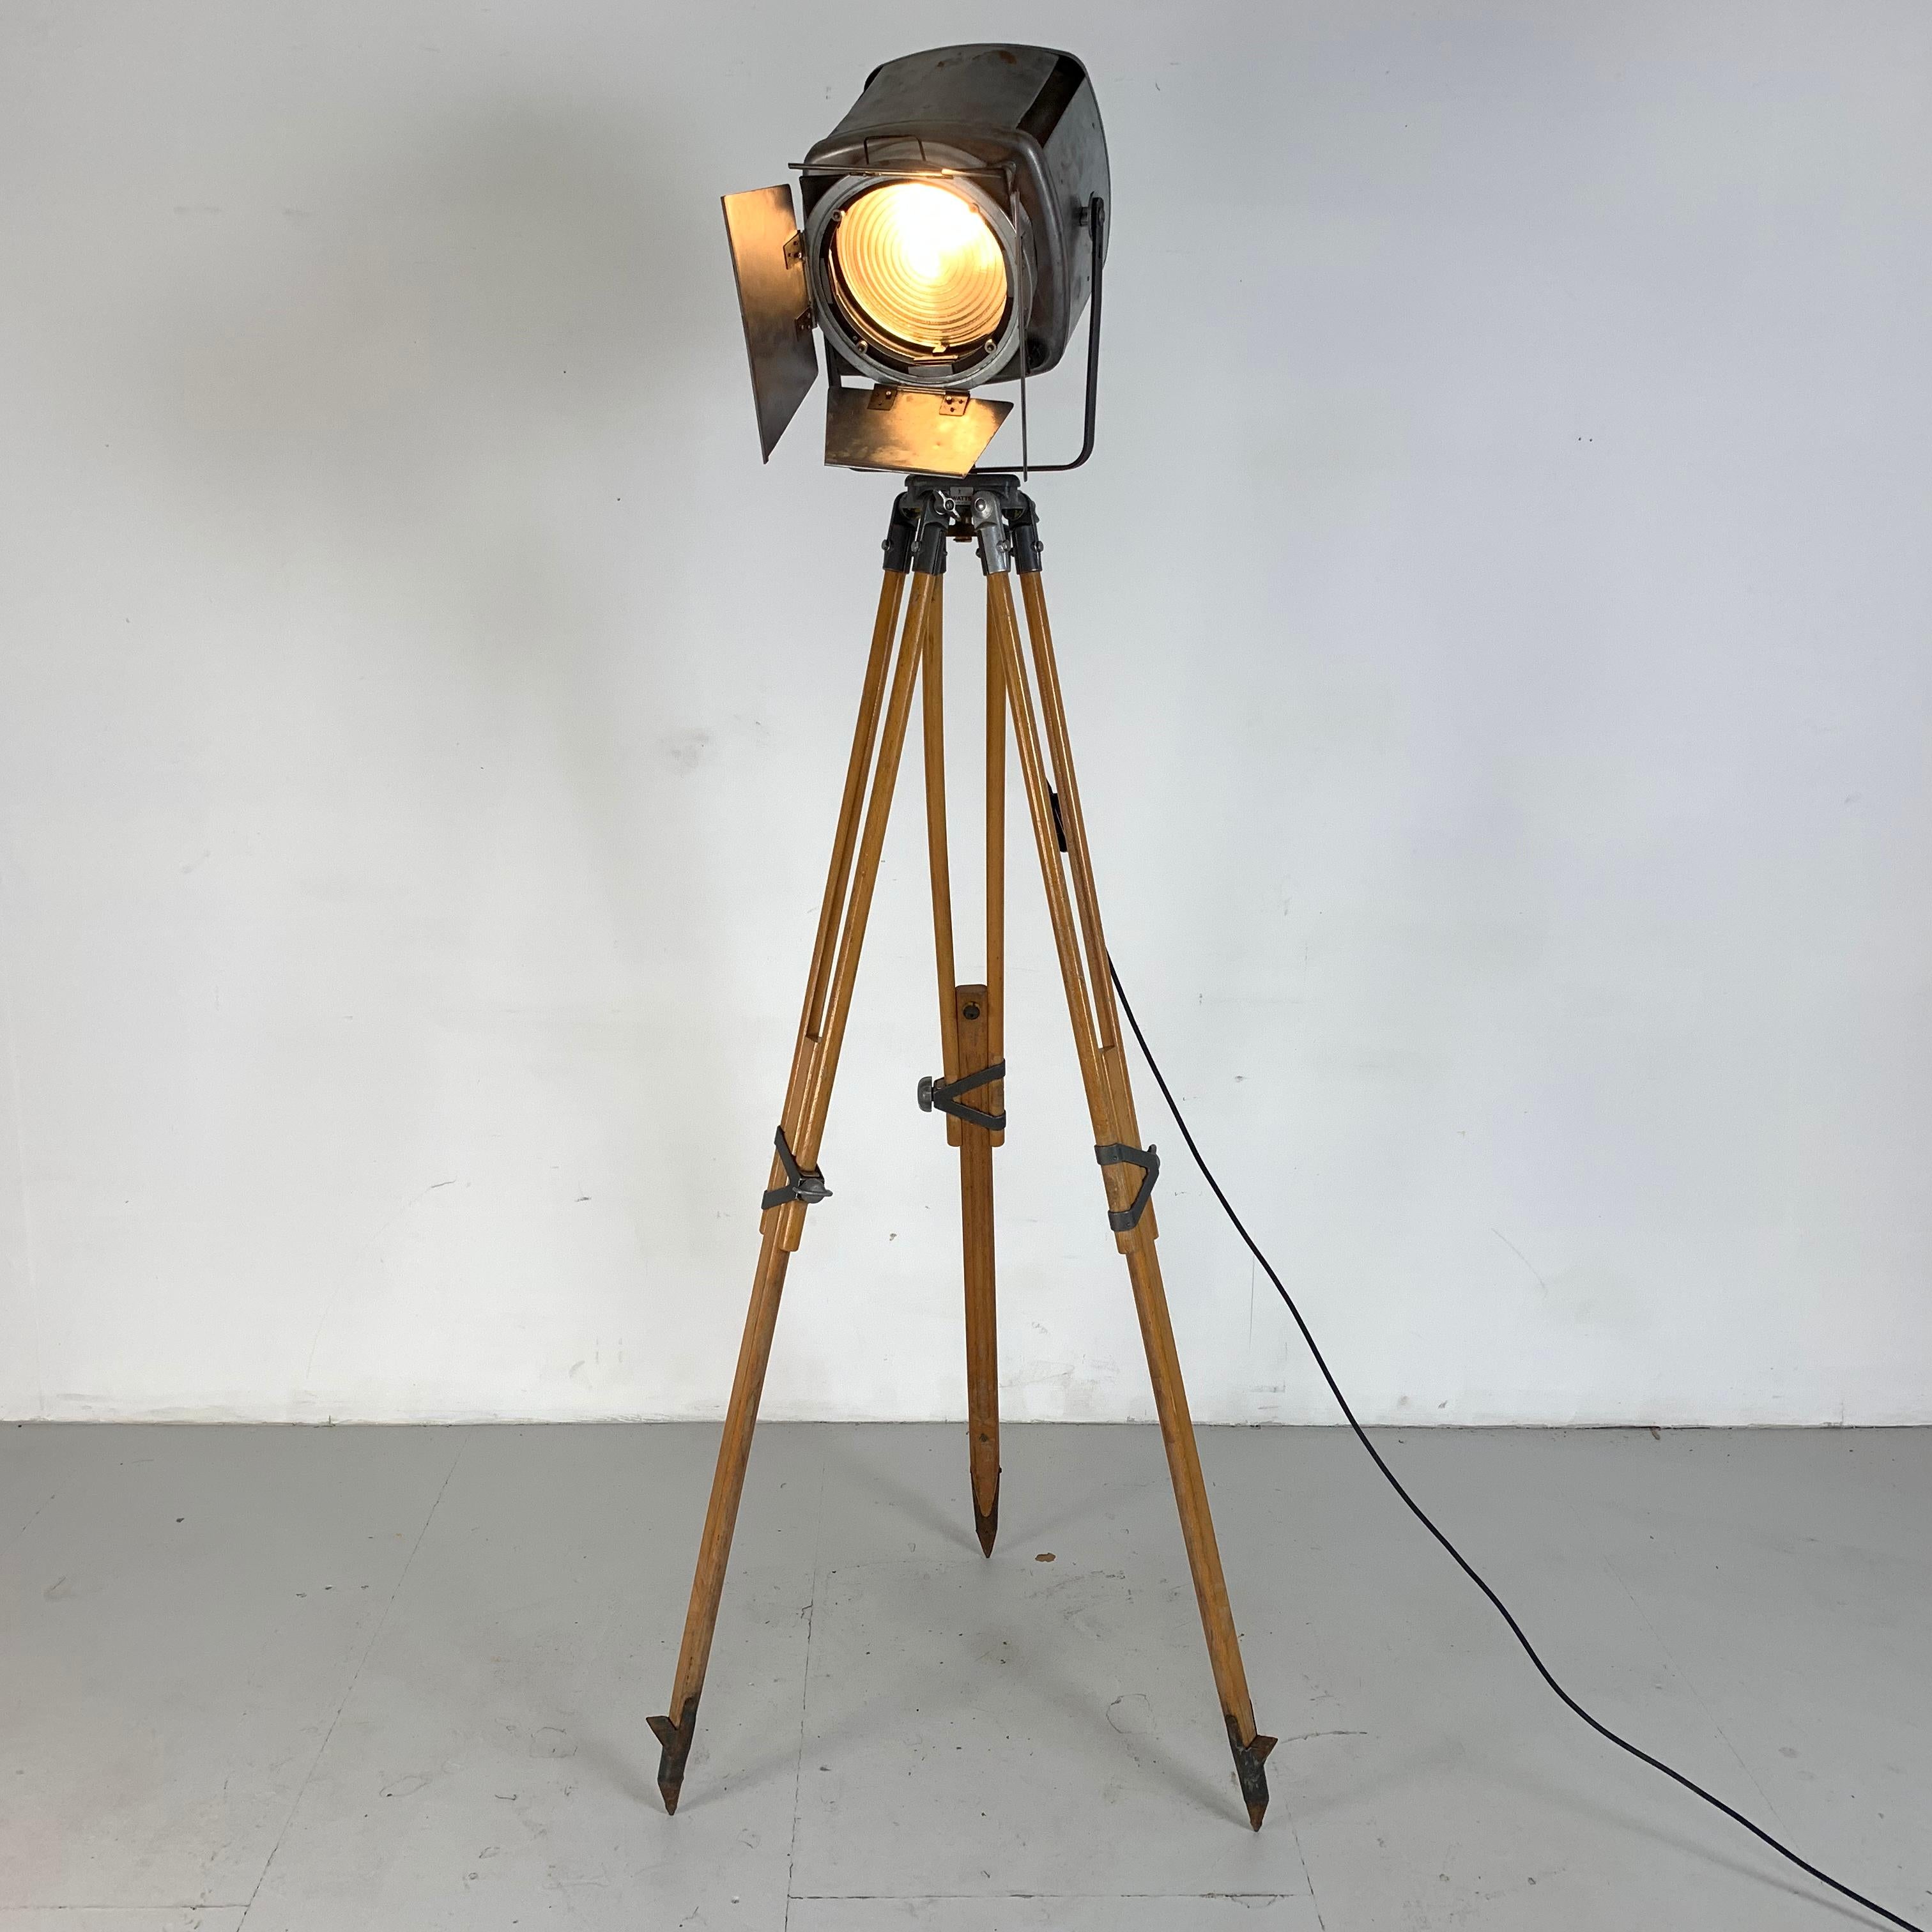 1960s strand 743 theatre light, stripped and polished to a raw metal finish, mounted on a vintage wooden tripod and still has its barn doors.

The lamp is in full working order, has been newly rewired and has an on/off switch.

The bulb holder